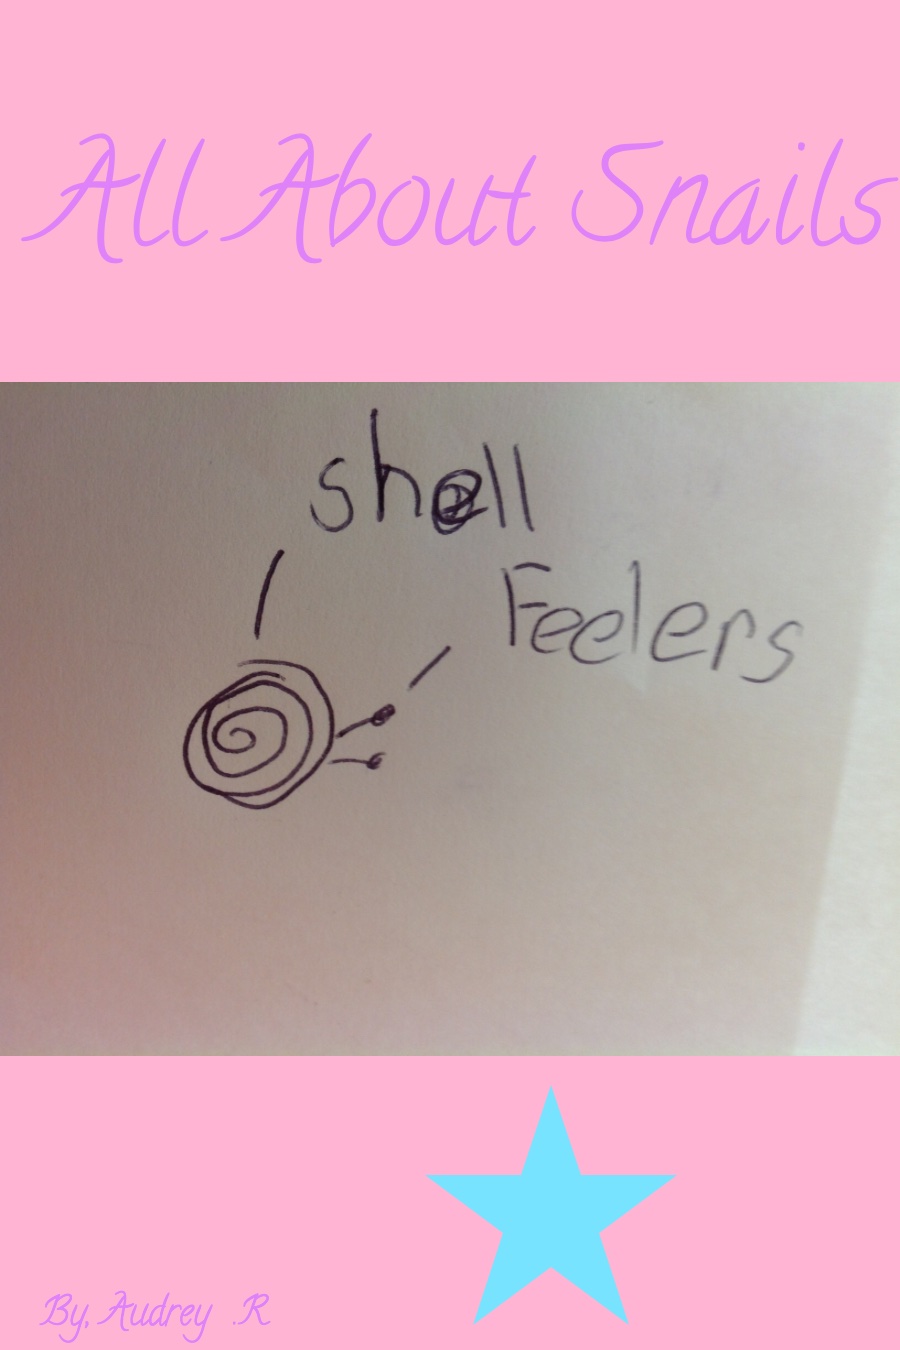 All About Snails by Audrey R